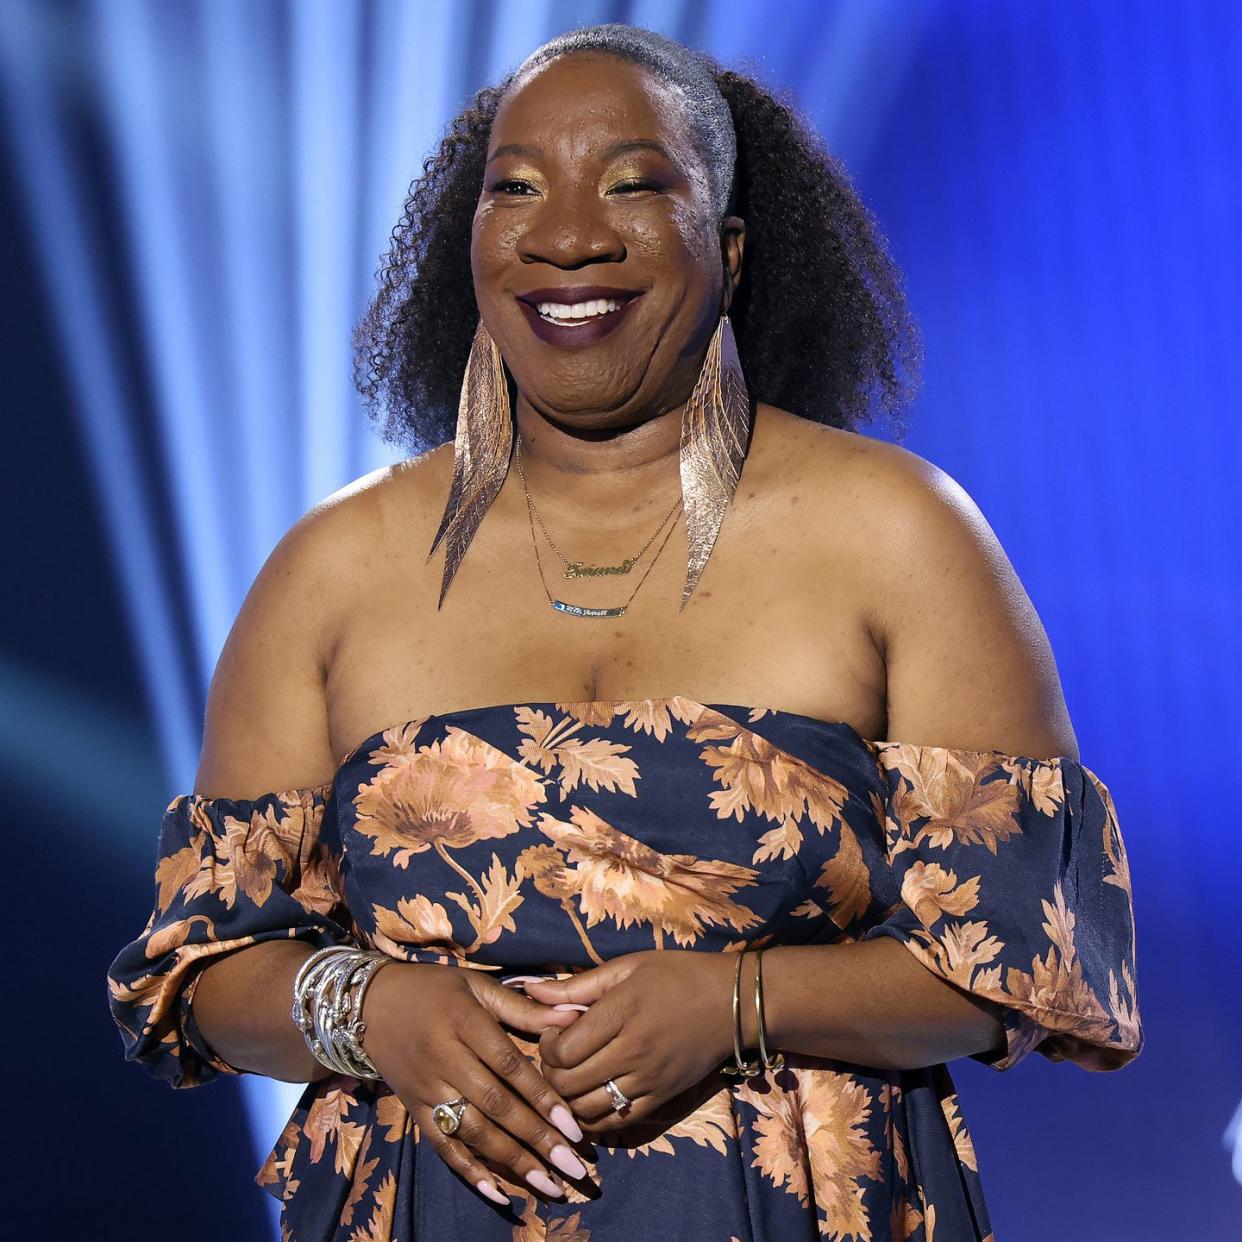 los angeles, california april 22 in this image released on april 22, 2021, tarana burke speaks onstage during essence black women in hollywood awards in los angeles, california photo by randy shropshiregetty images for essence